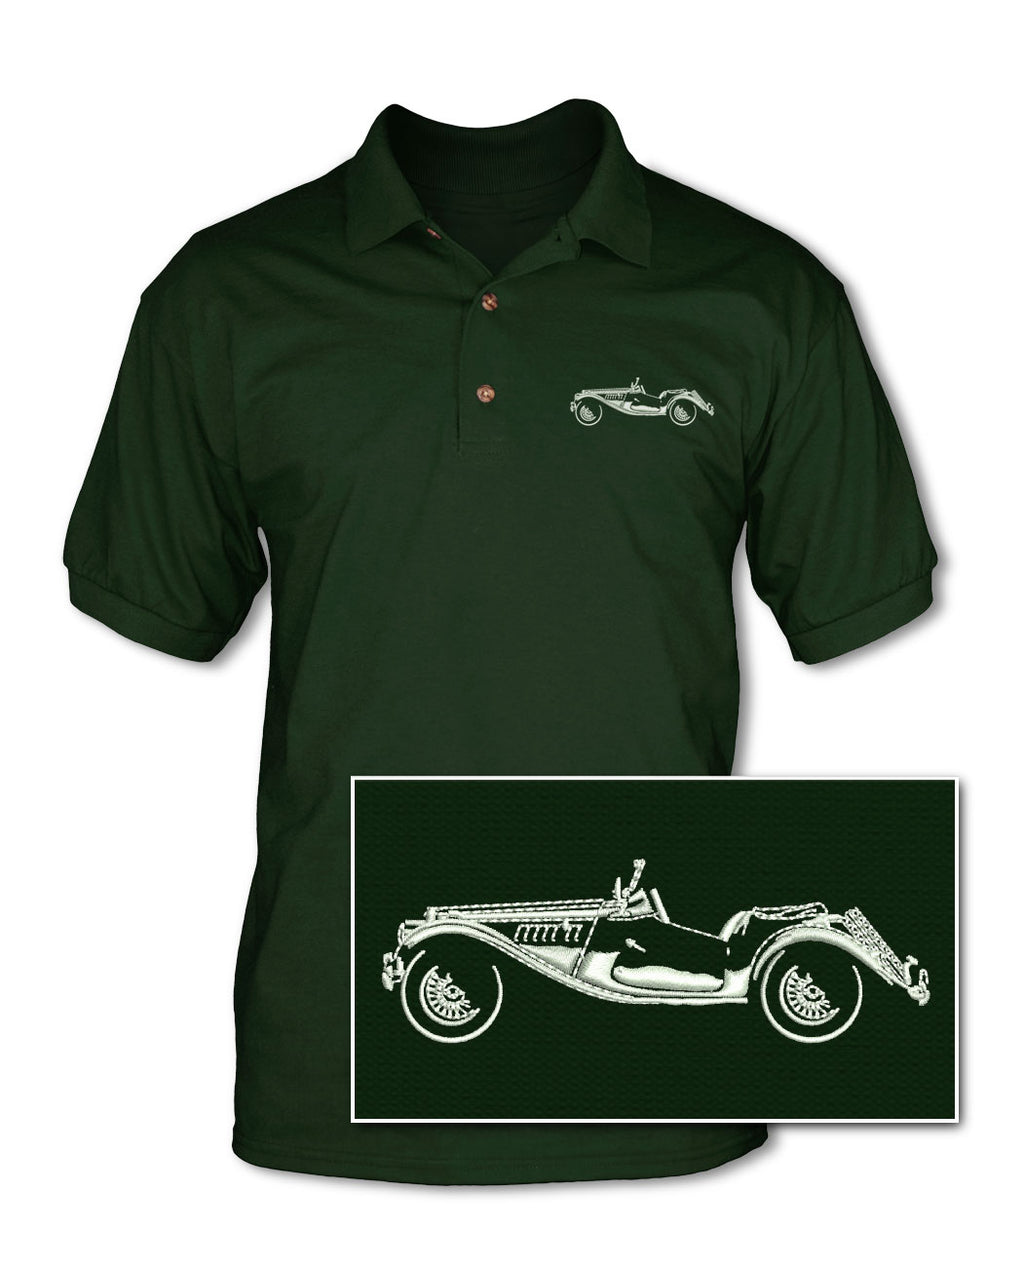 MG TF Roadster Adult Pique Polo Shirt - Side View